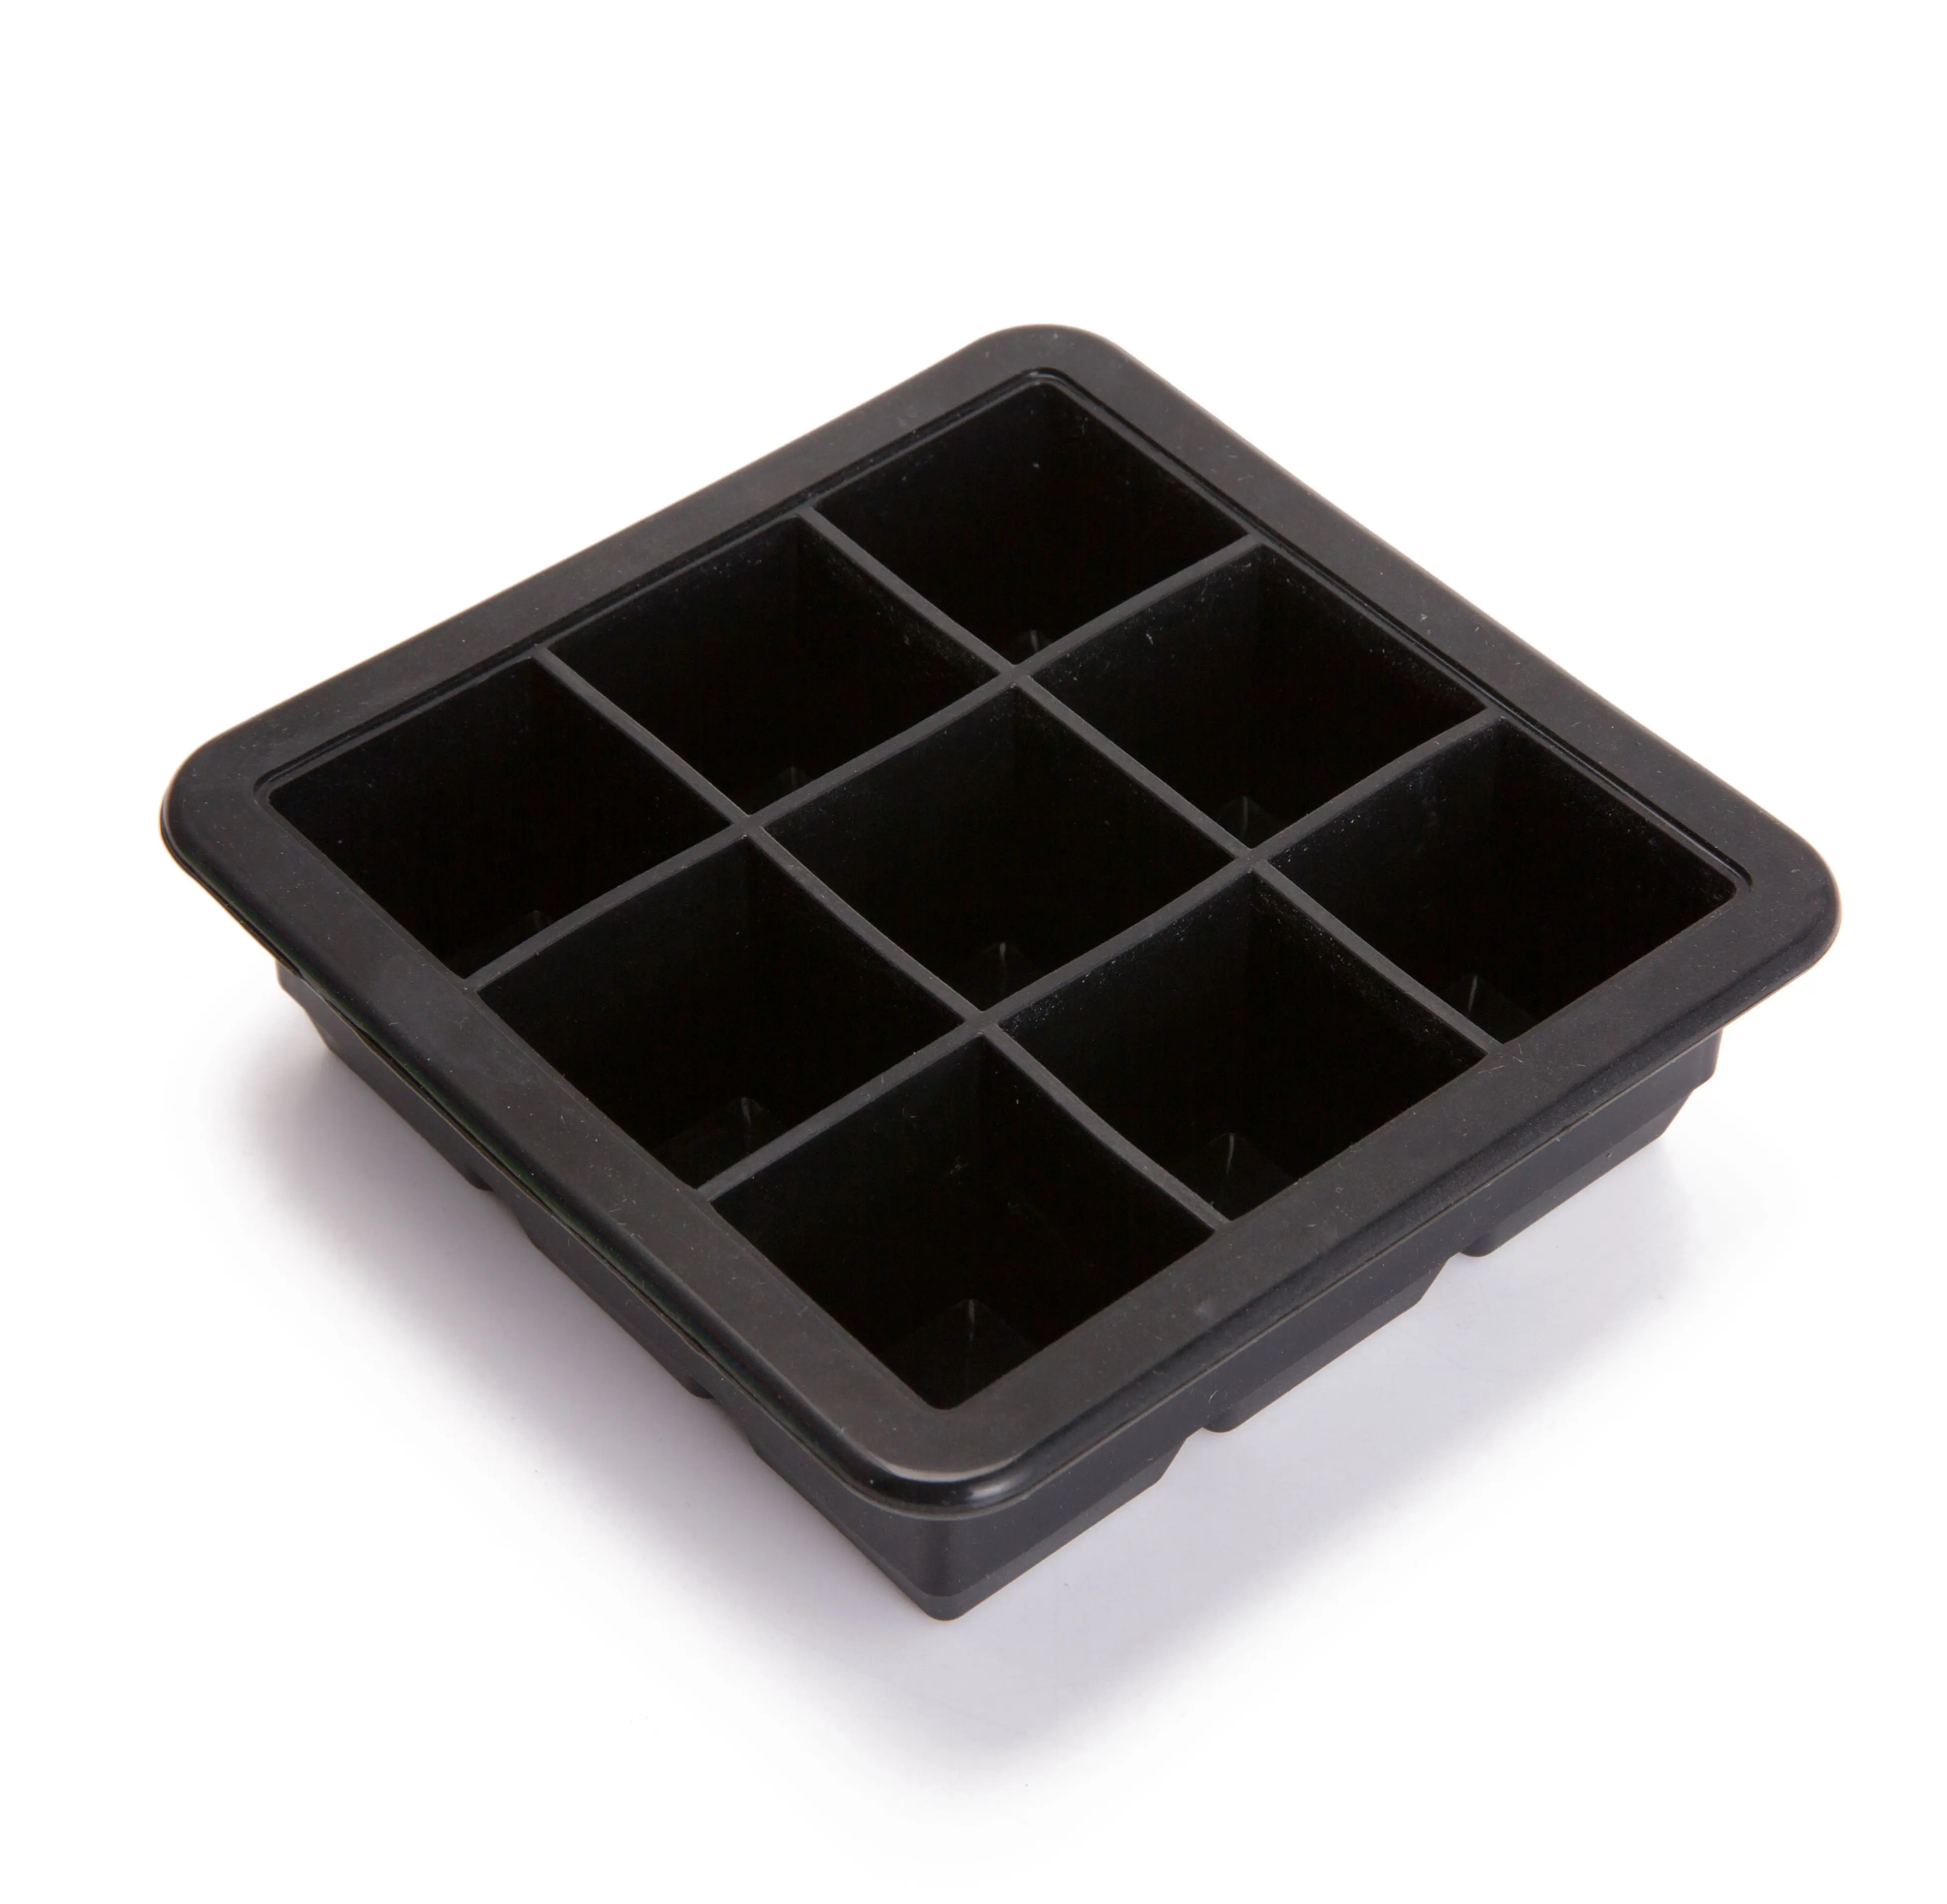 

9 Holes Big Ice Cube Trays Large Silicone Ice Cube Maker Mold, According to pantone color